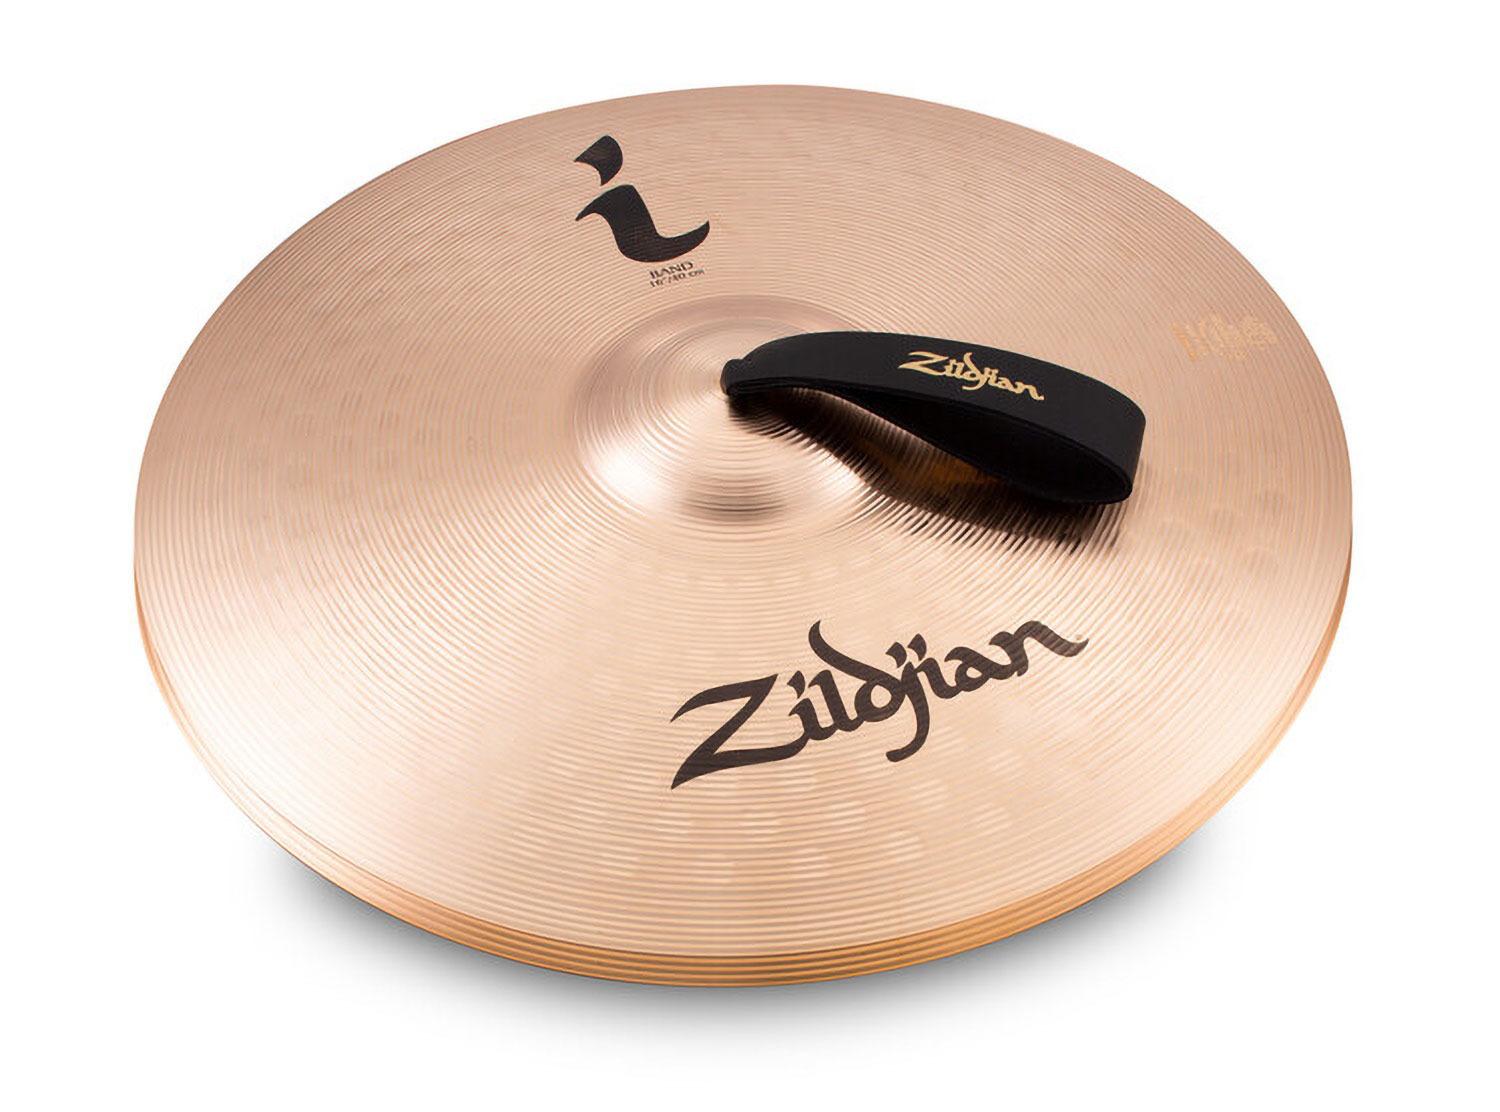 Zildjian I Band Cymbals Pair 16 inches - image 1 of 1